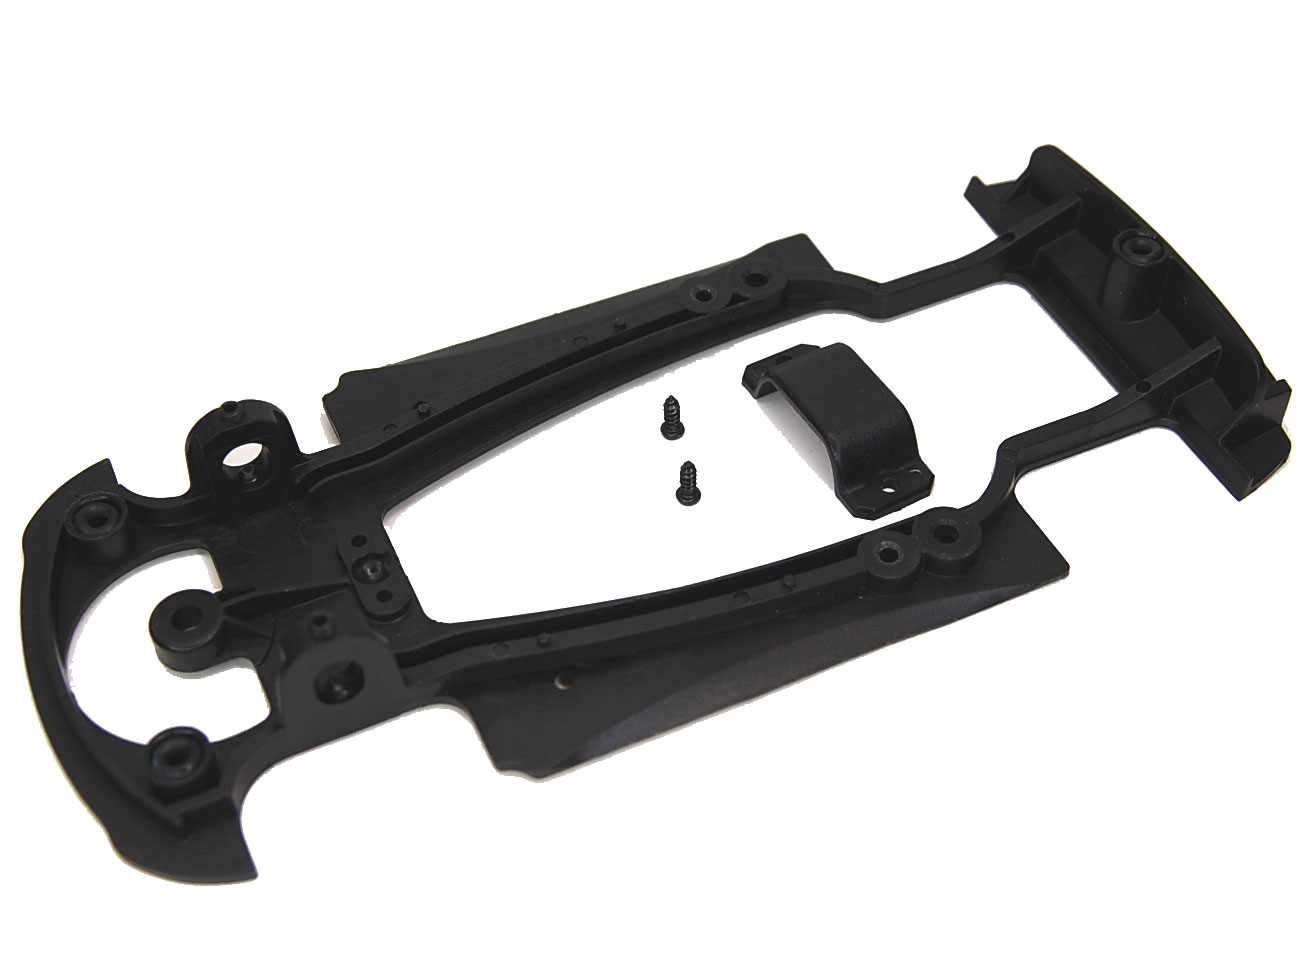 S-043 Chassis Renault Megane with Motor strap and screws